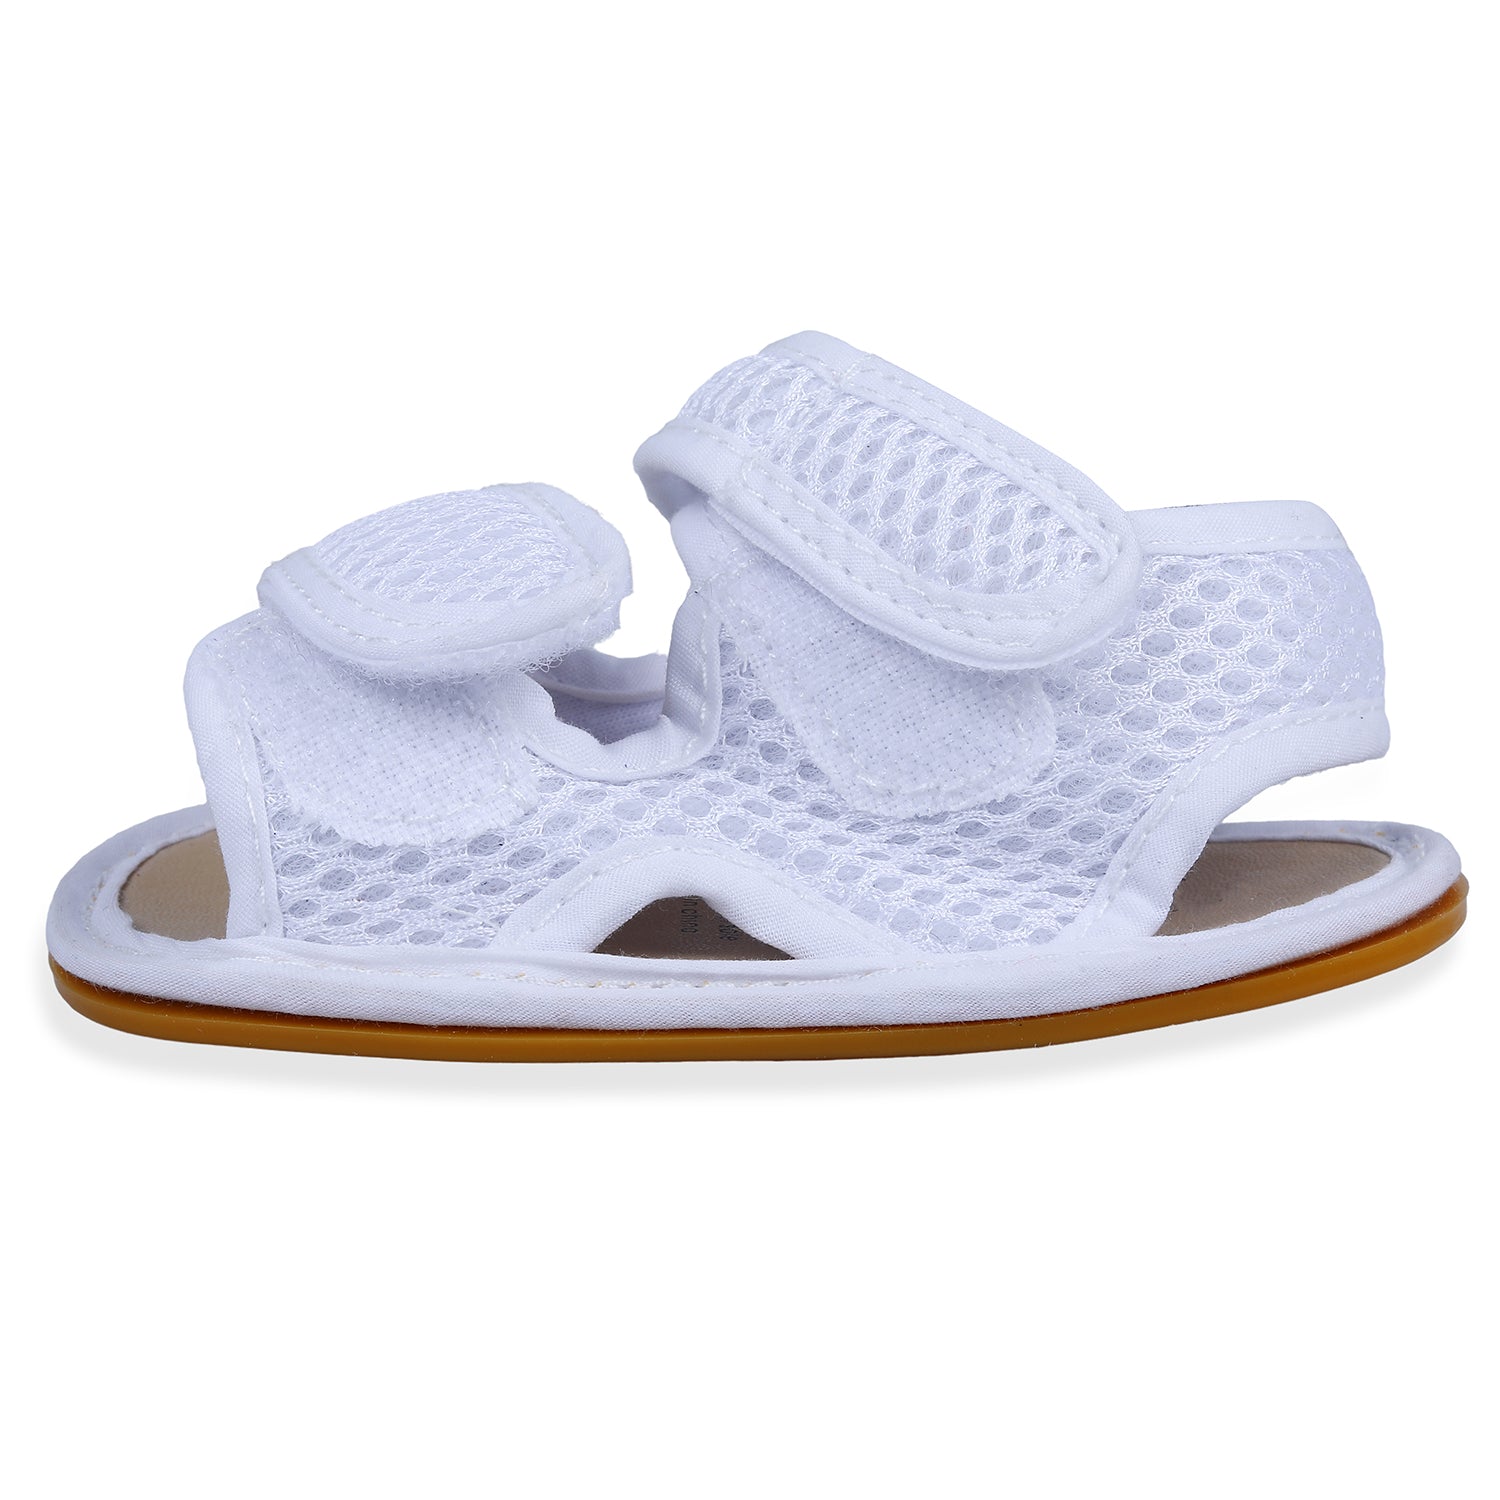 Solid Hookloop Comfortable Anti-skid Floater Sandals - White - Baby Moo